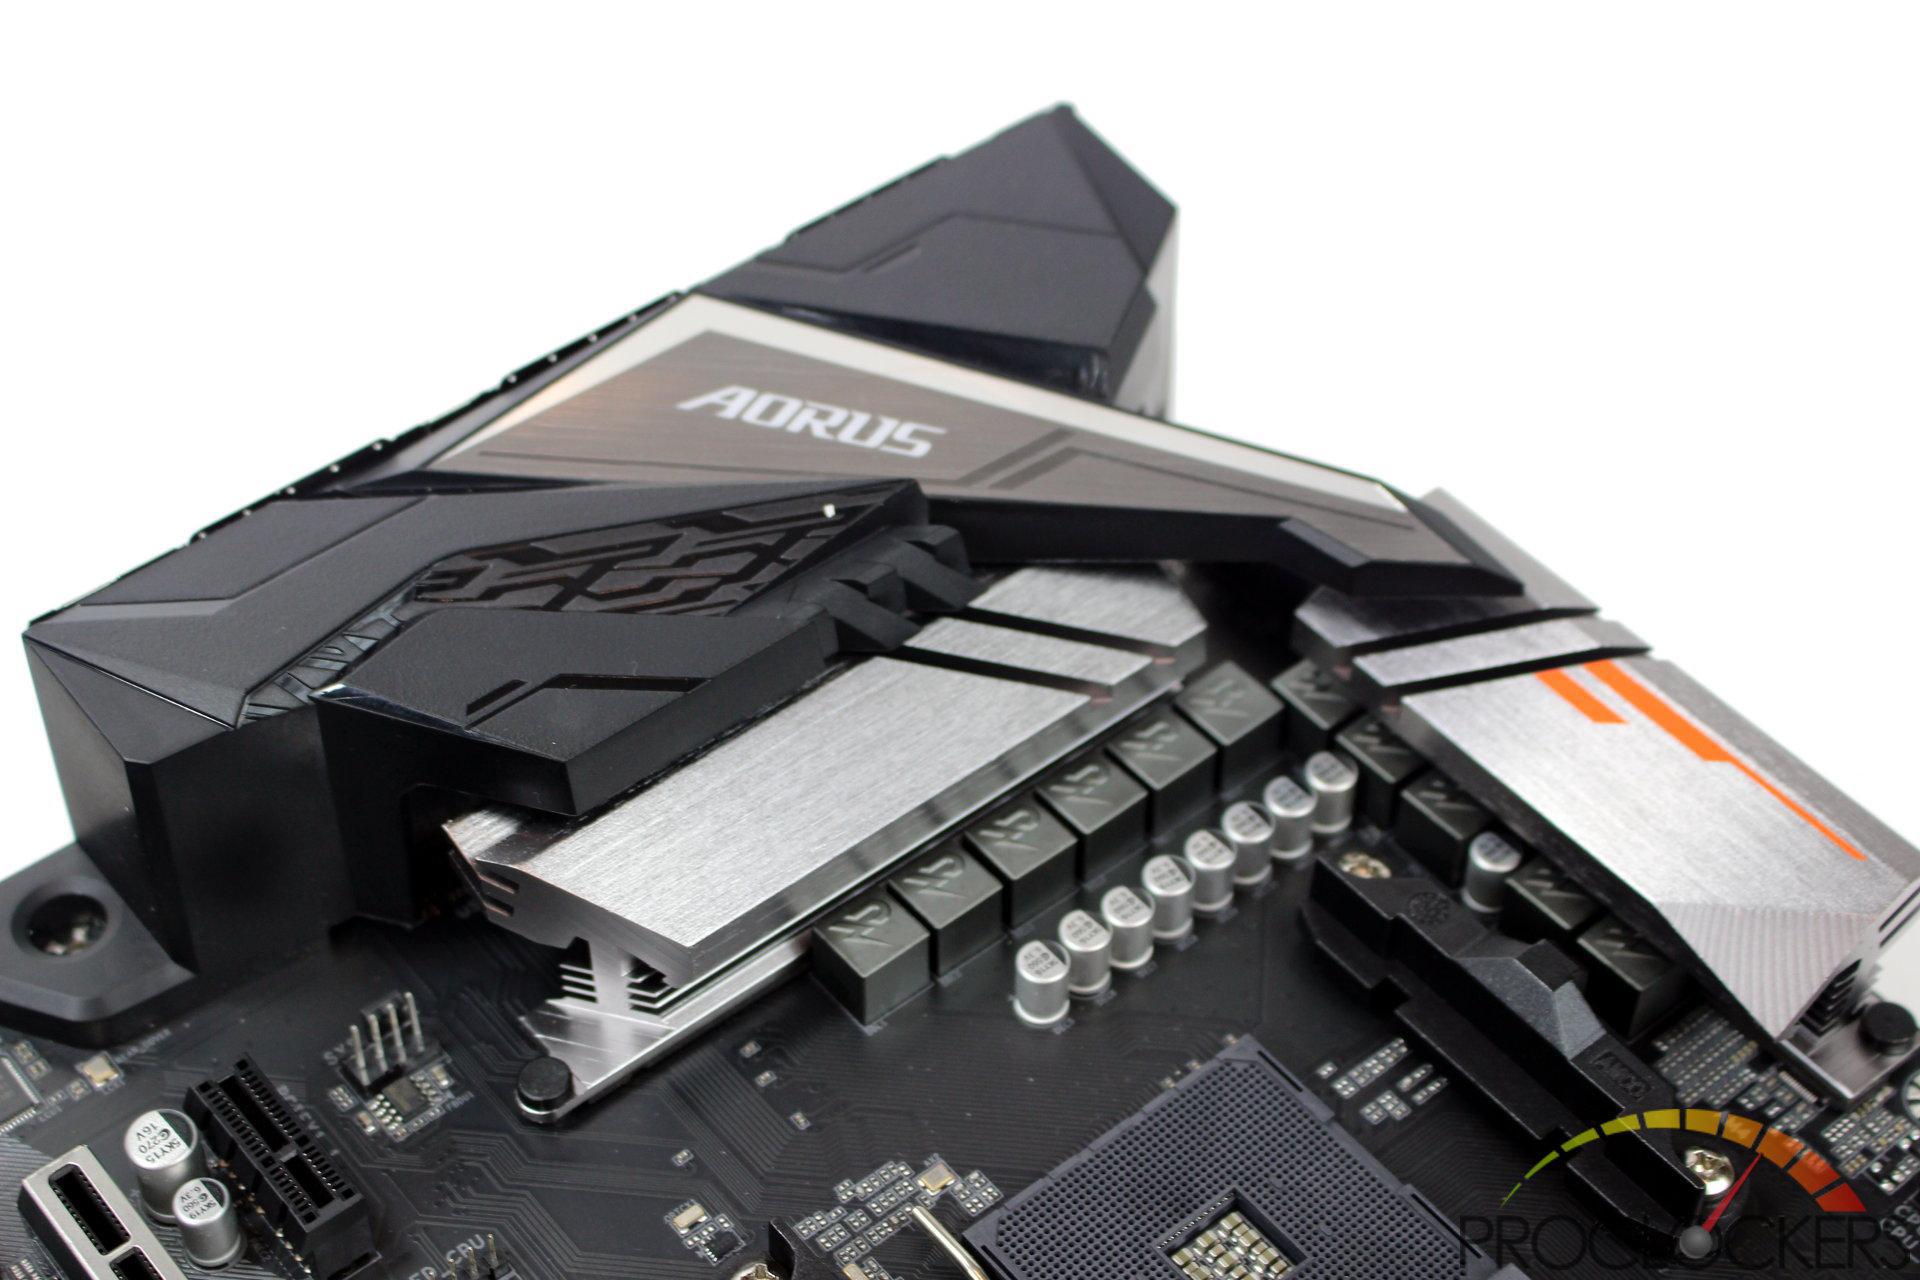 Gigabyte B450 Aorus Pro WiFi AM4 Motherboard Review | Page 9 of 9